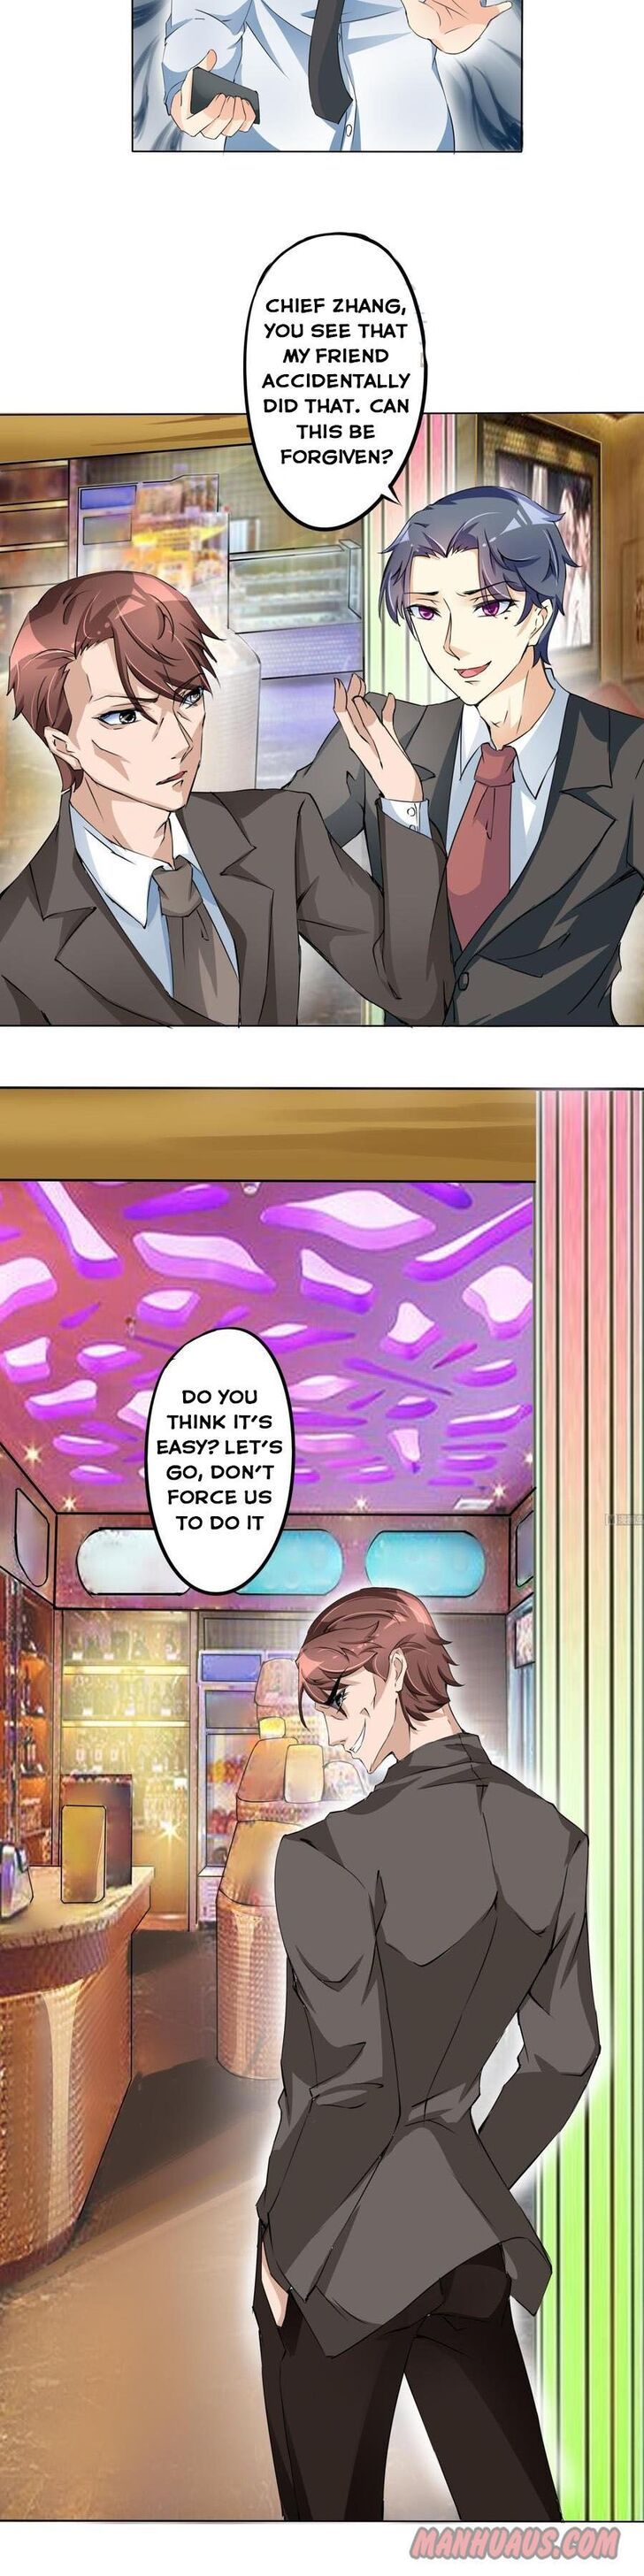 Cultivation Return on Campus Chapter 006 page 7